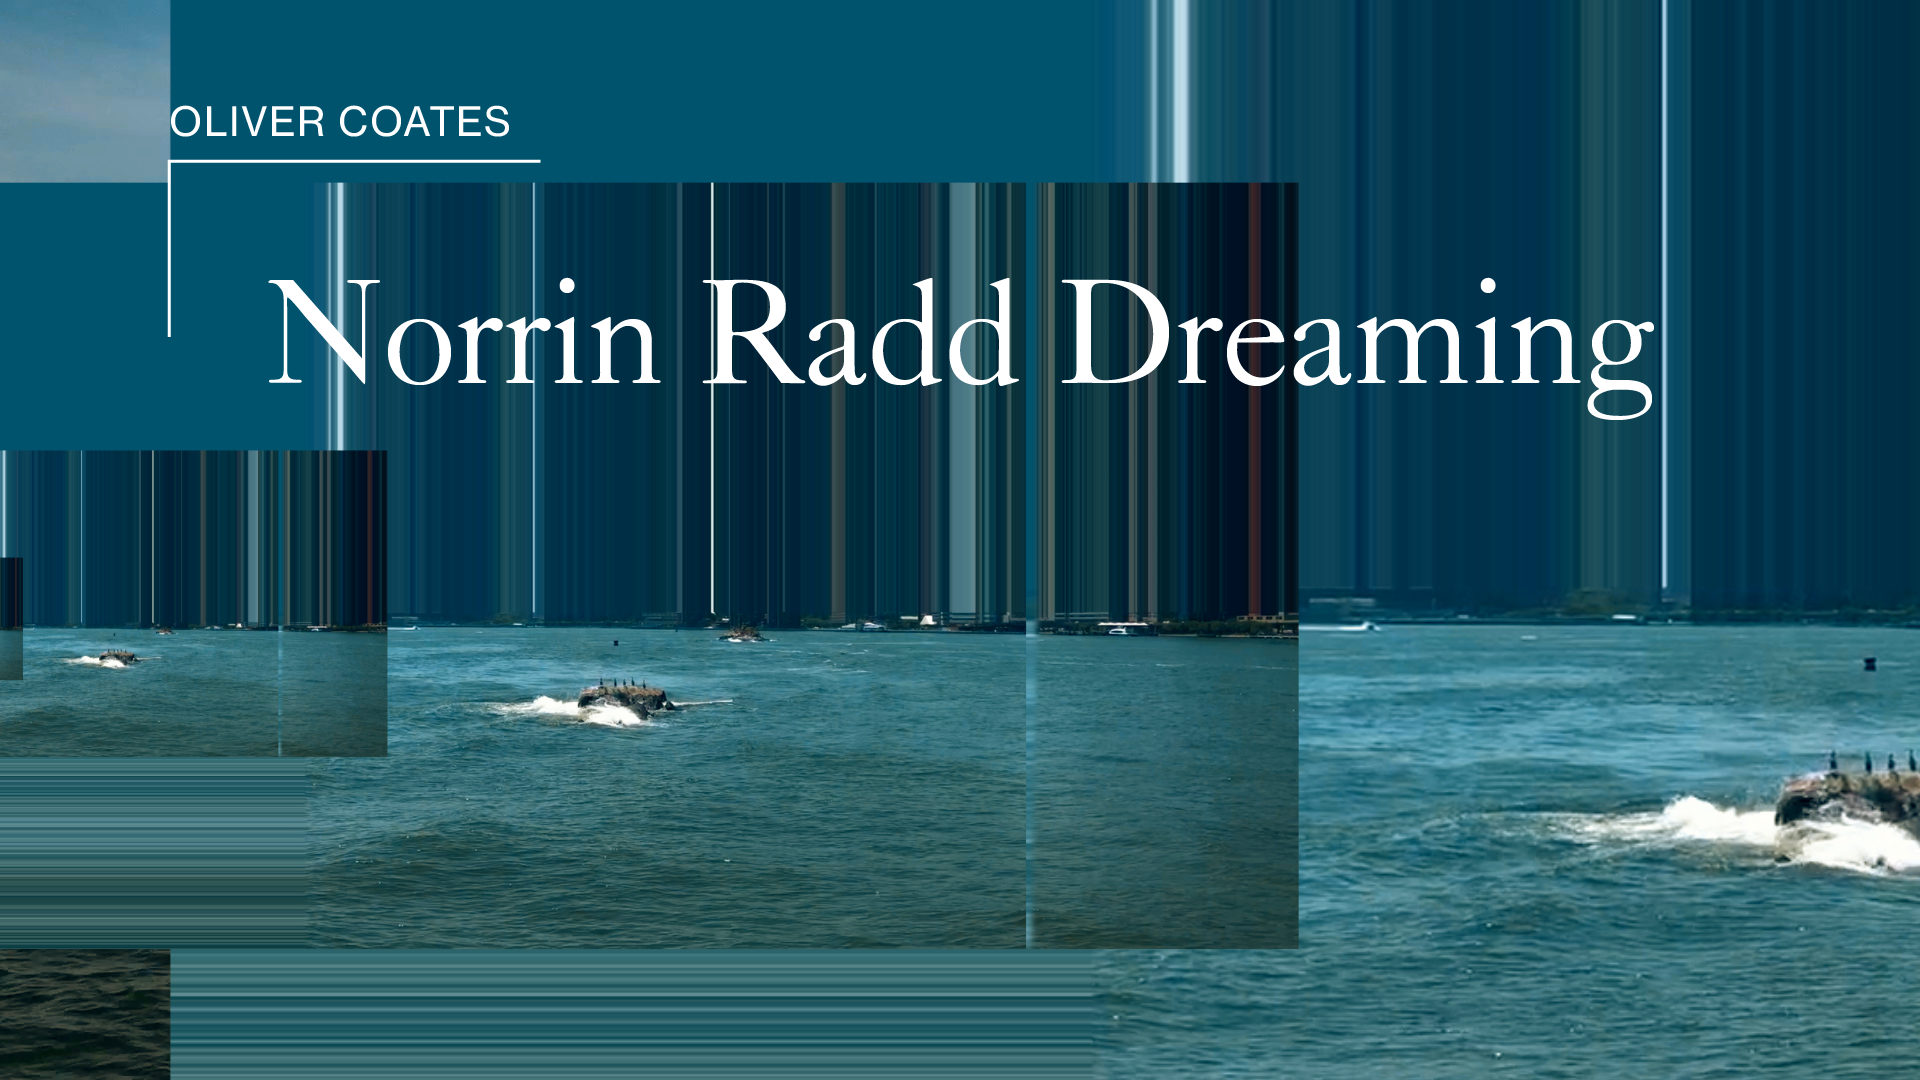 Link to Video for Oliver Coates – Norrin Radd Dreaming (feat. Malibu)